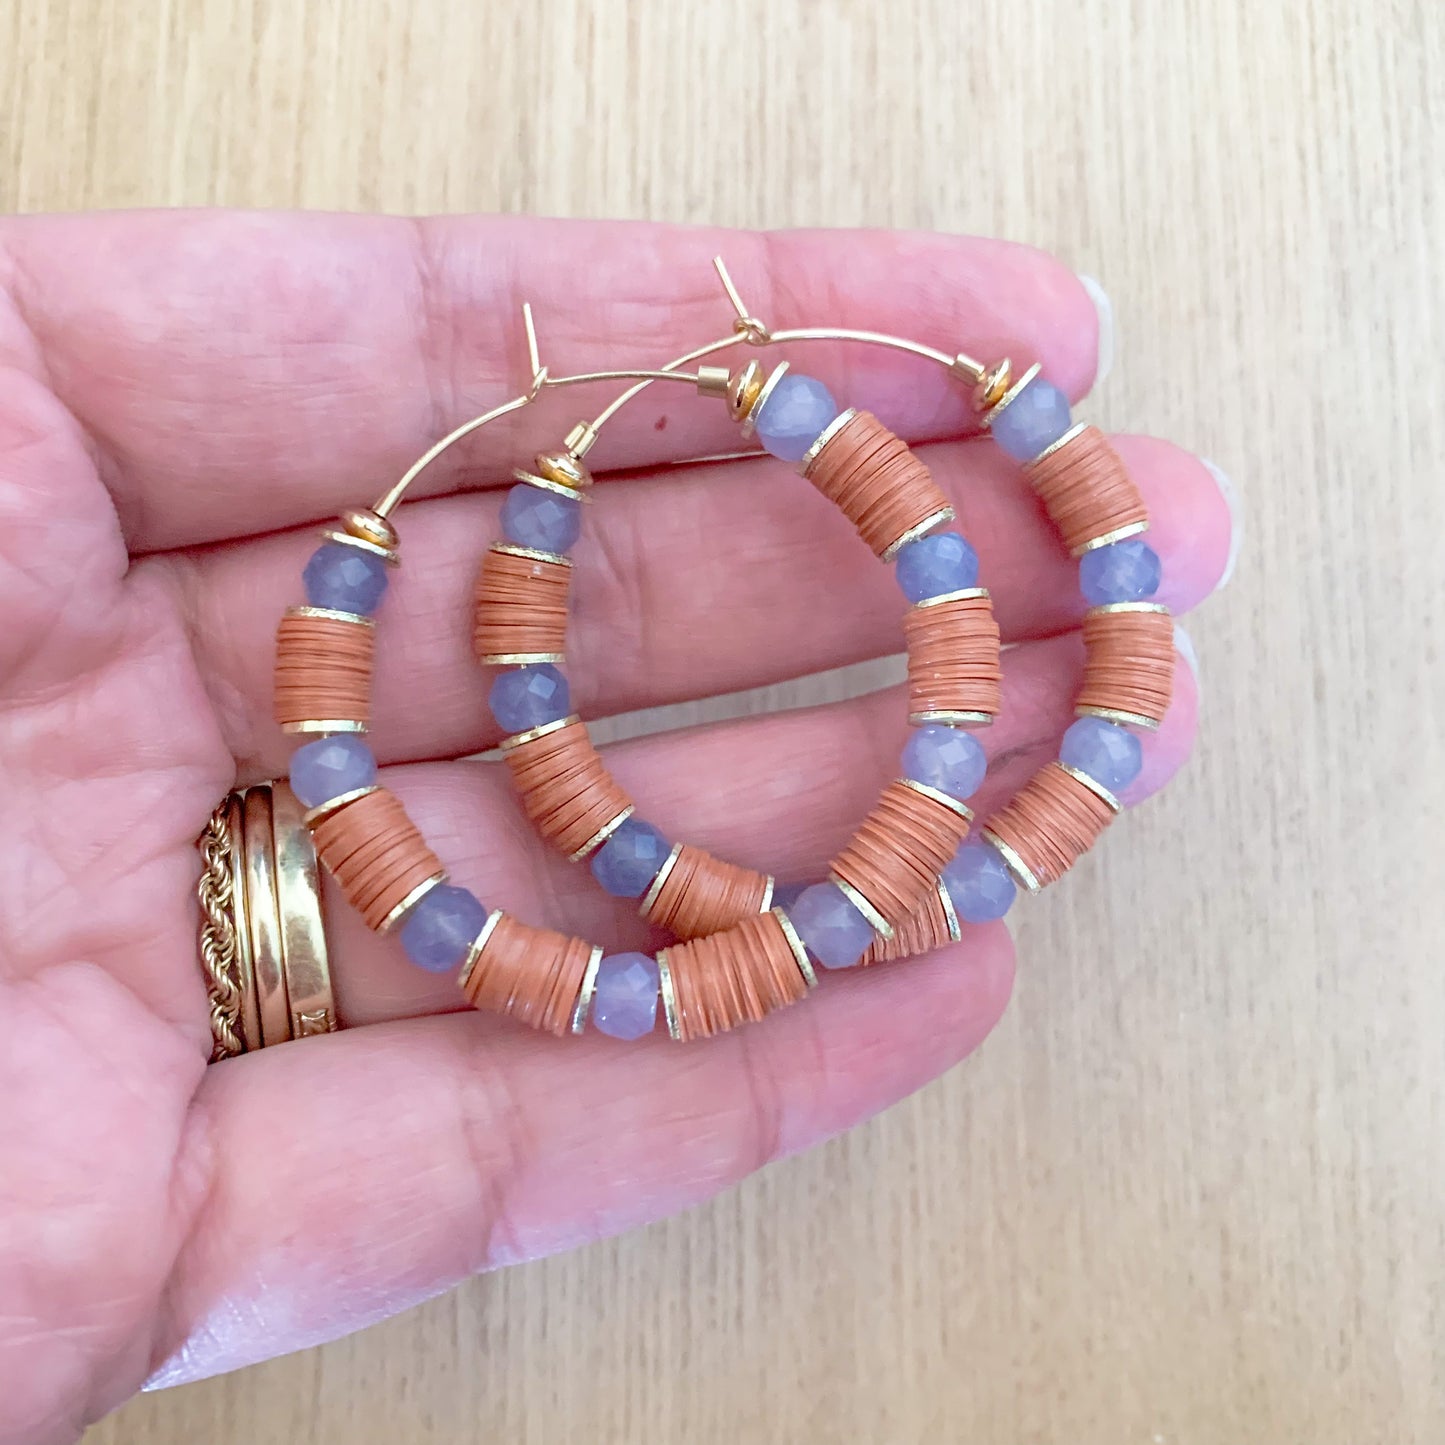 Lavender and Terra cotta hoops